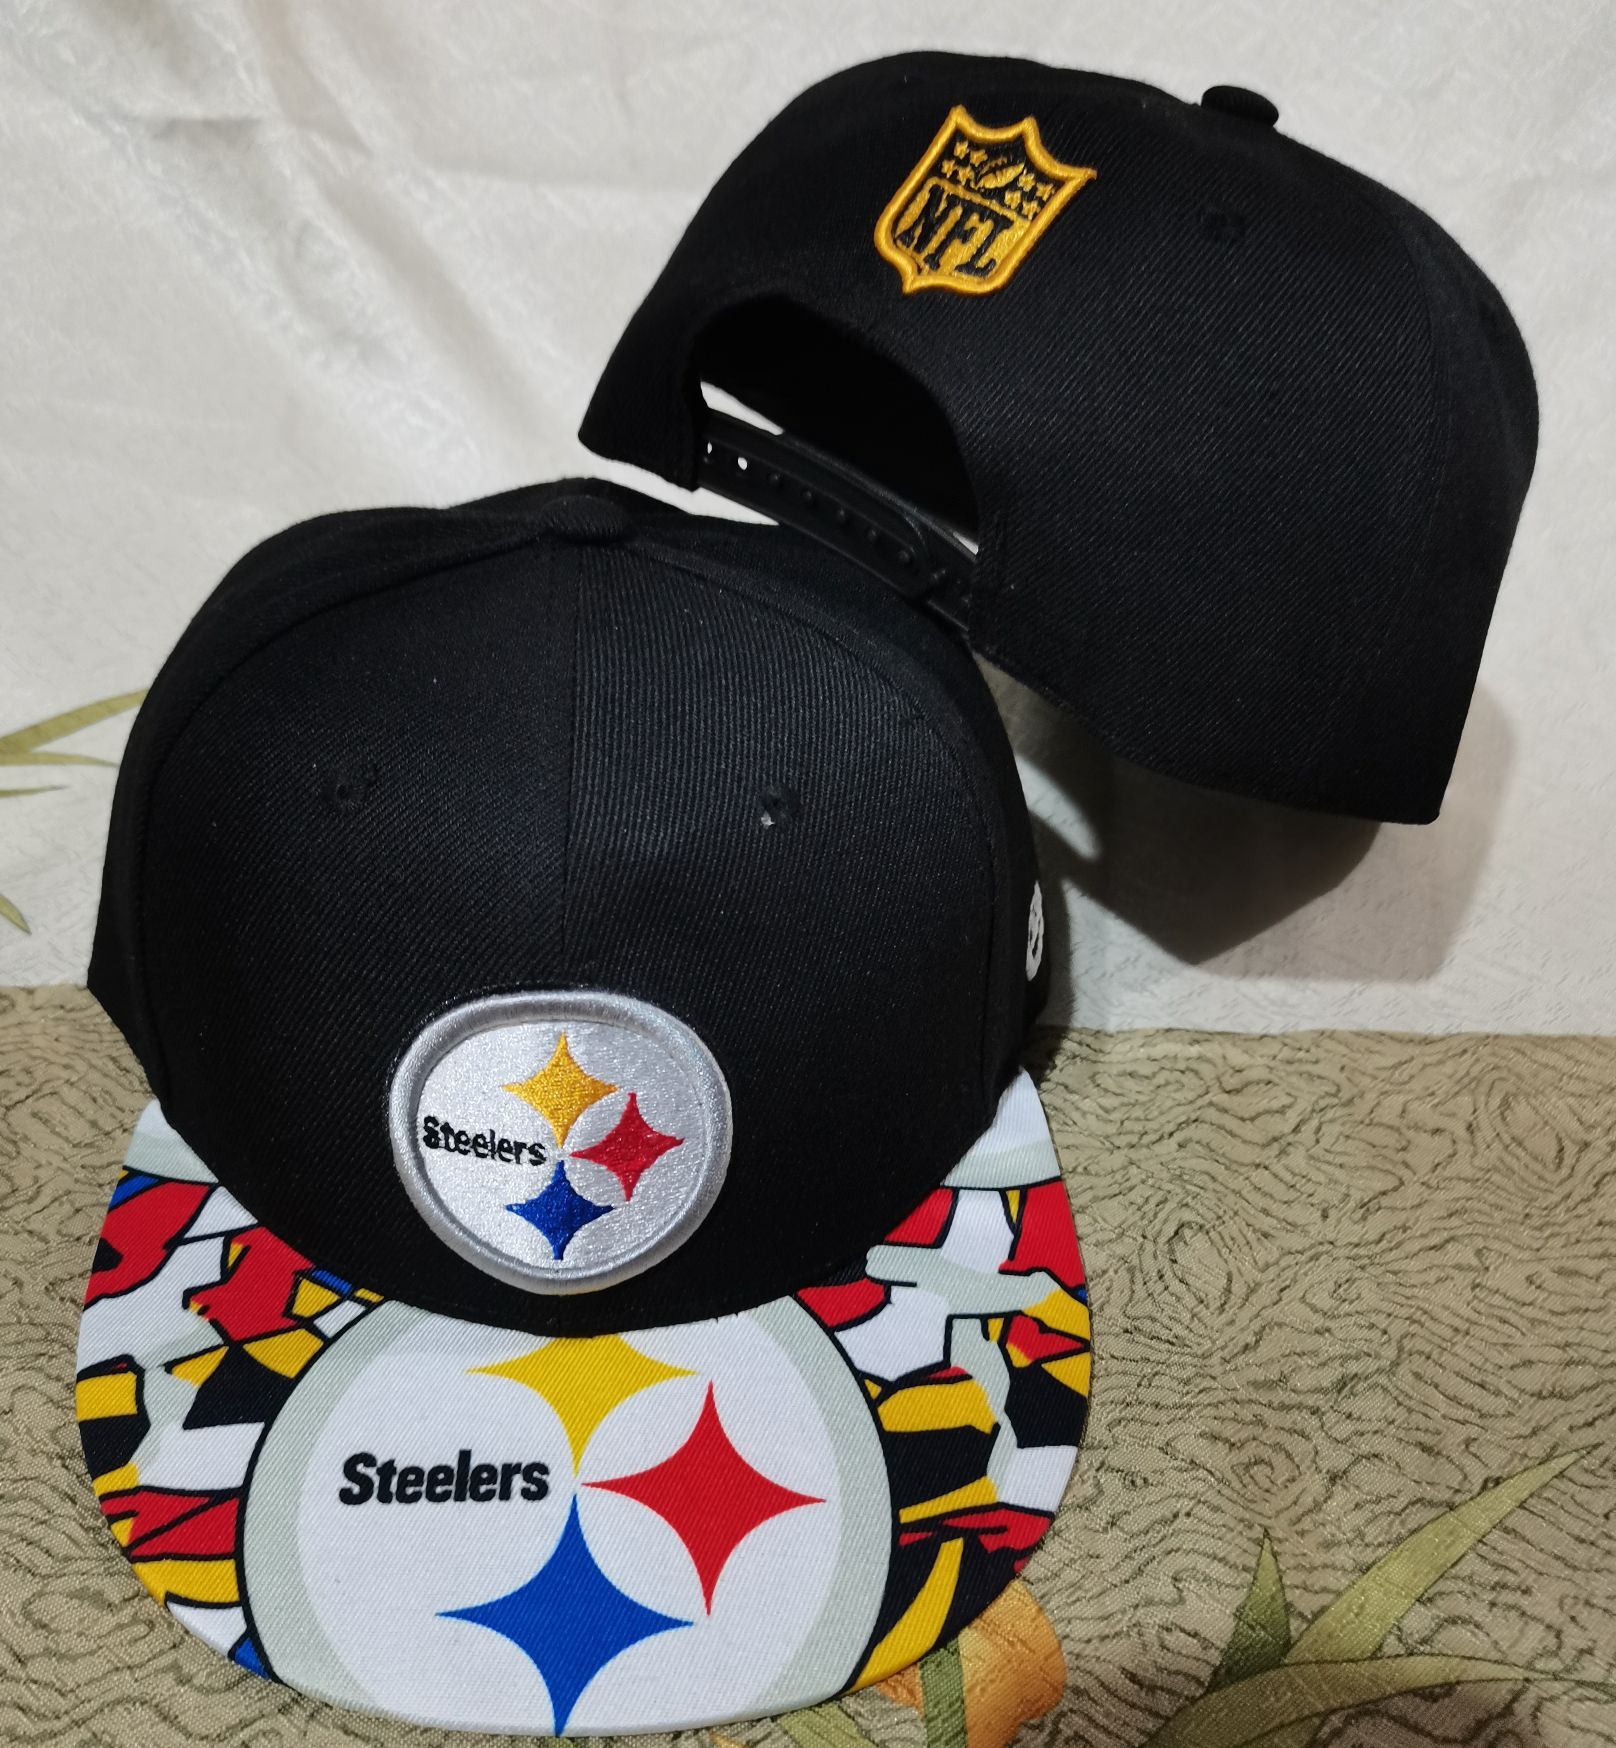 Cheap 2022 NFL Pittsburgh Steelers 1 hat GSMY